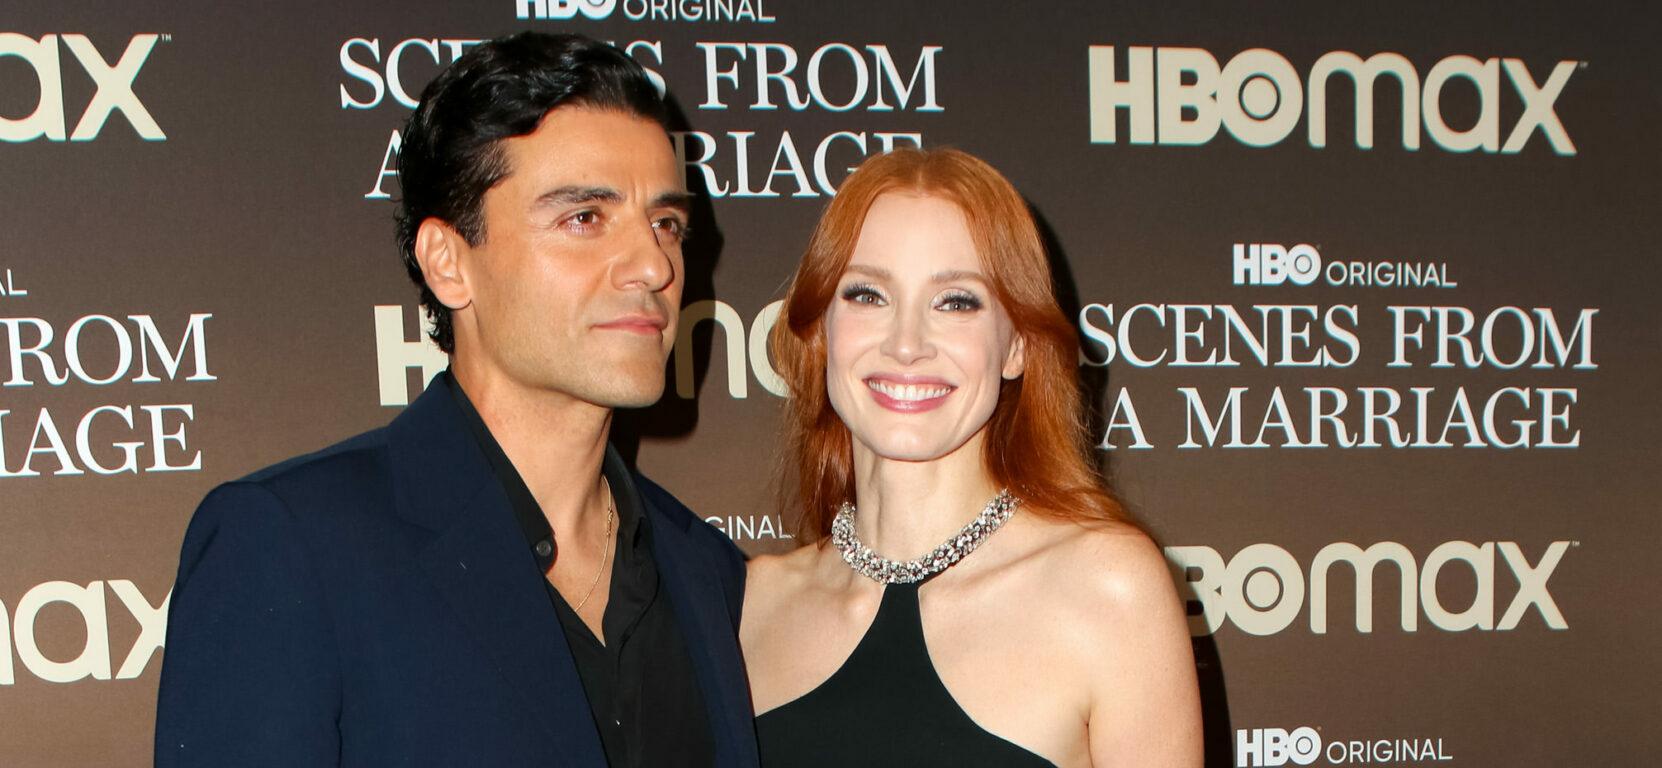 Oscar Isaac and Jessica Chastain attending the finale screening of HBO 'Scenes From a Marriage'